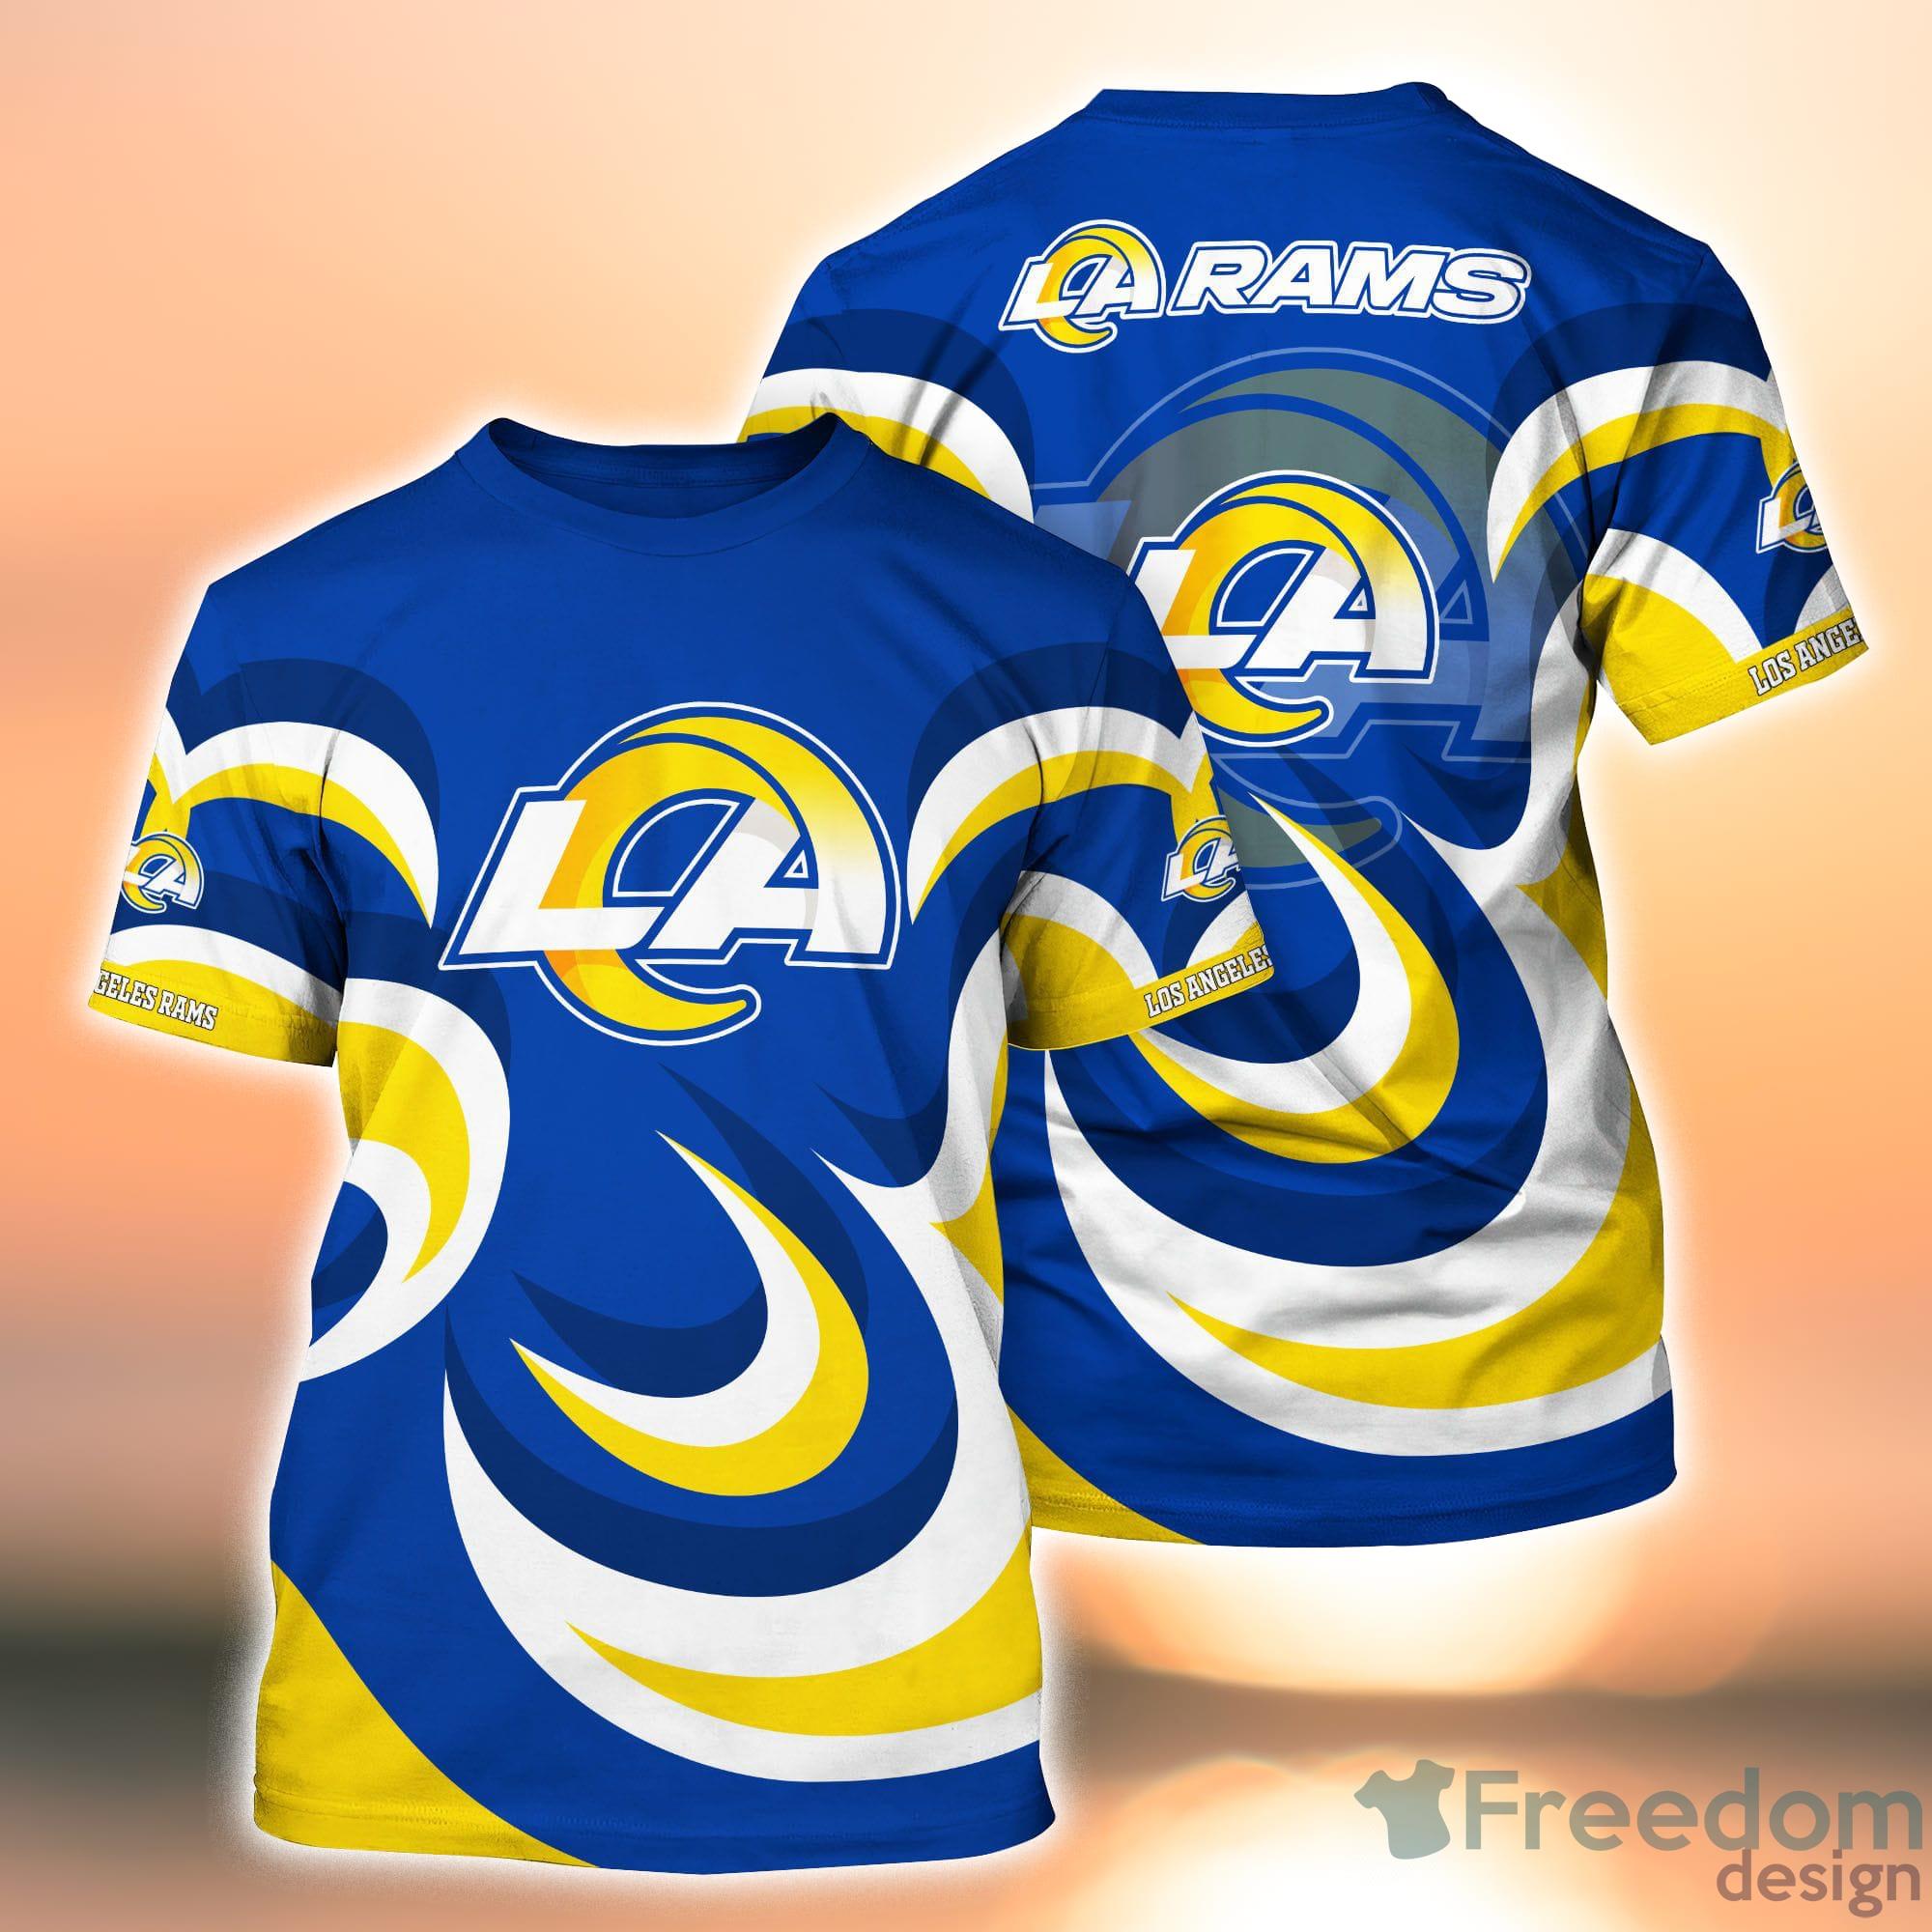 Los Angeles Rams Shirt 3D For Men And Women - Freedomdesign